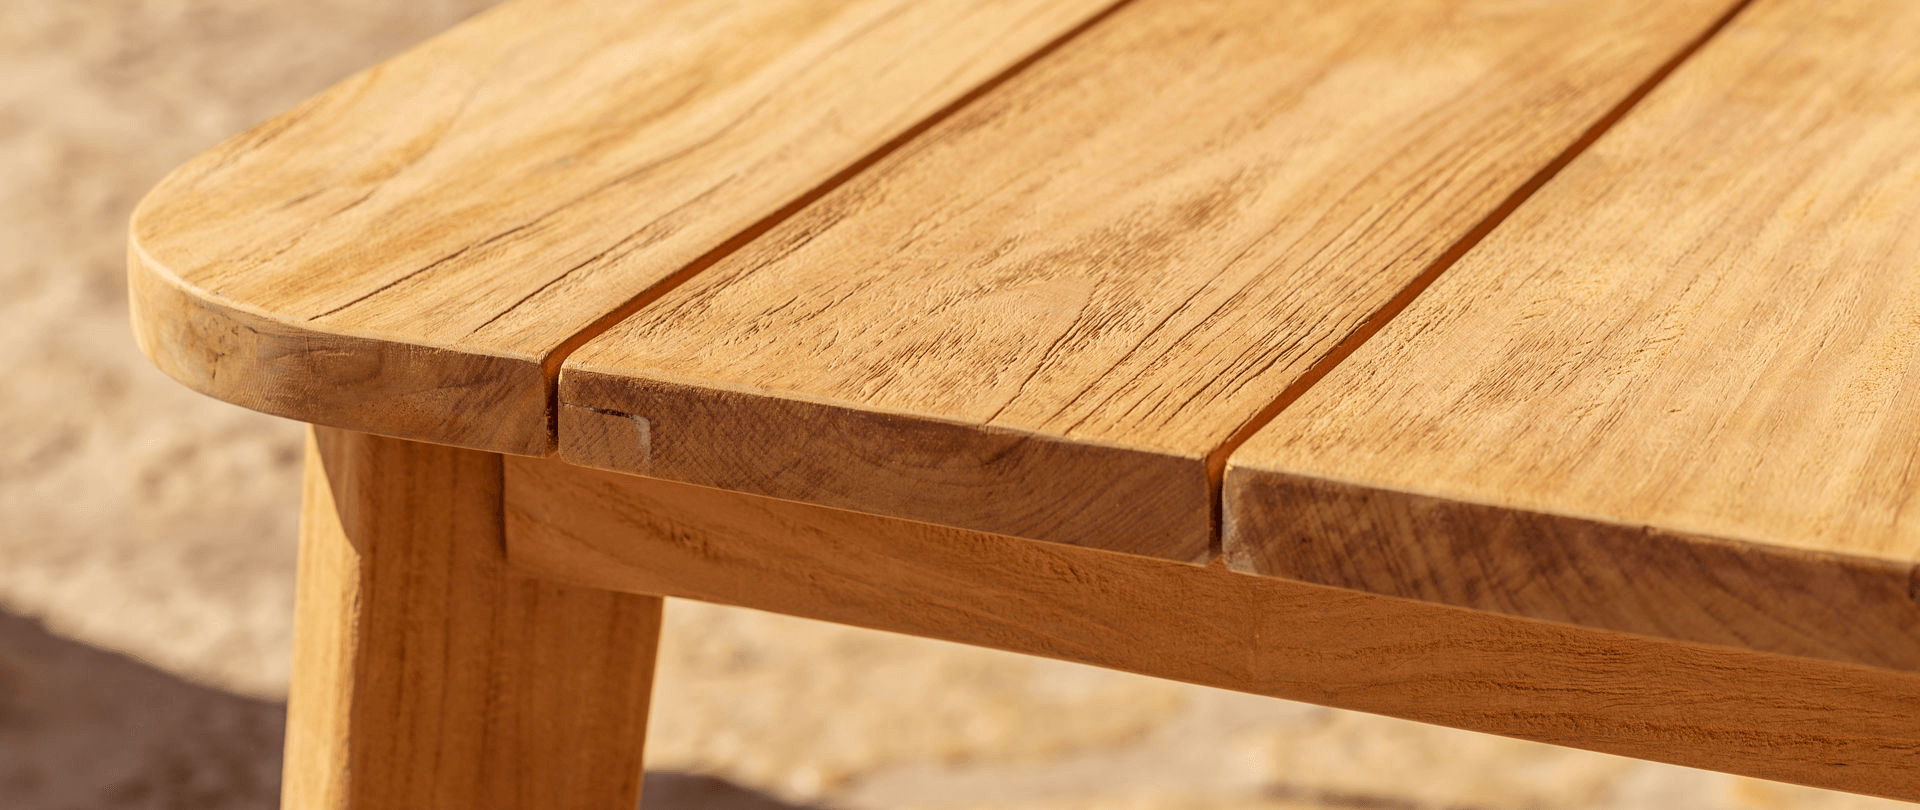 outdoor table showcasing the natural wood grain and texture, symbolizing sustainability and eco-friendly materials.